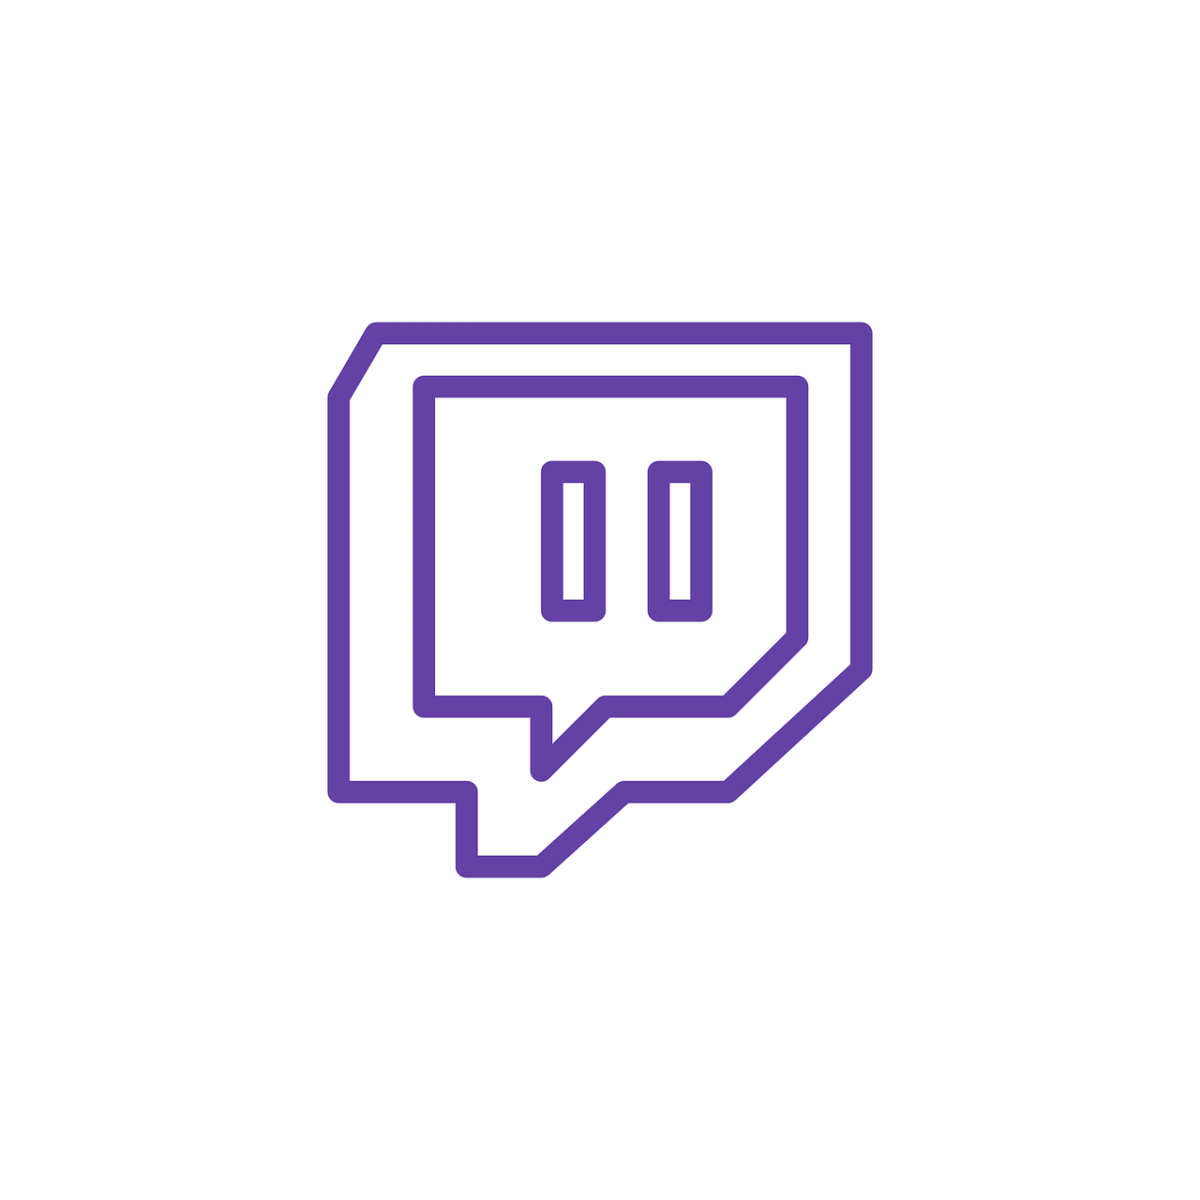 How one man revived R6: a Twitch story